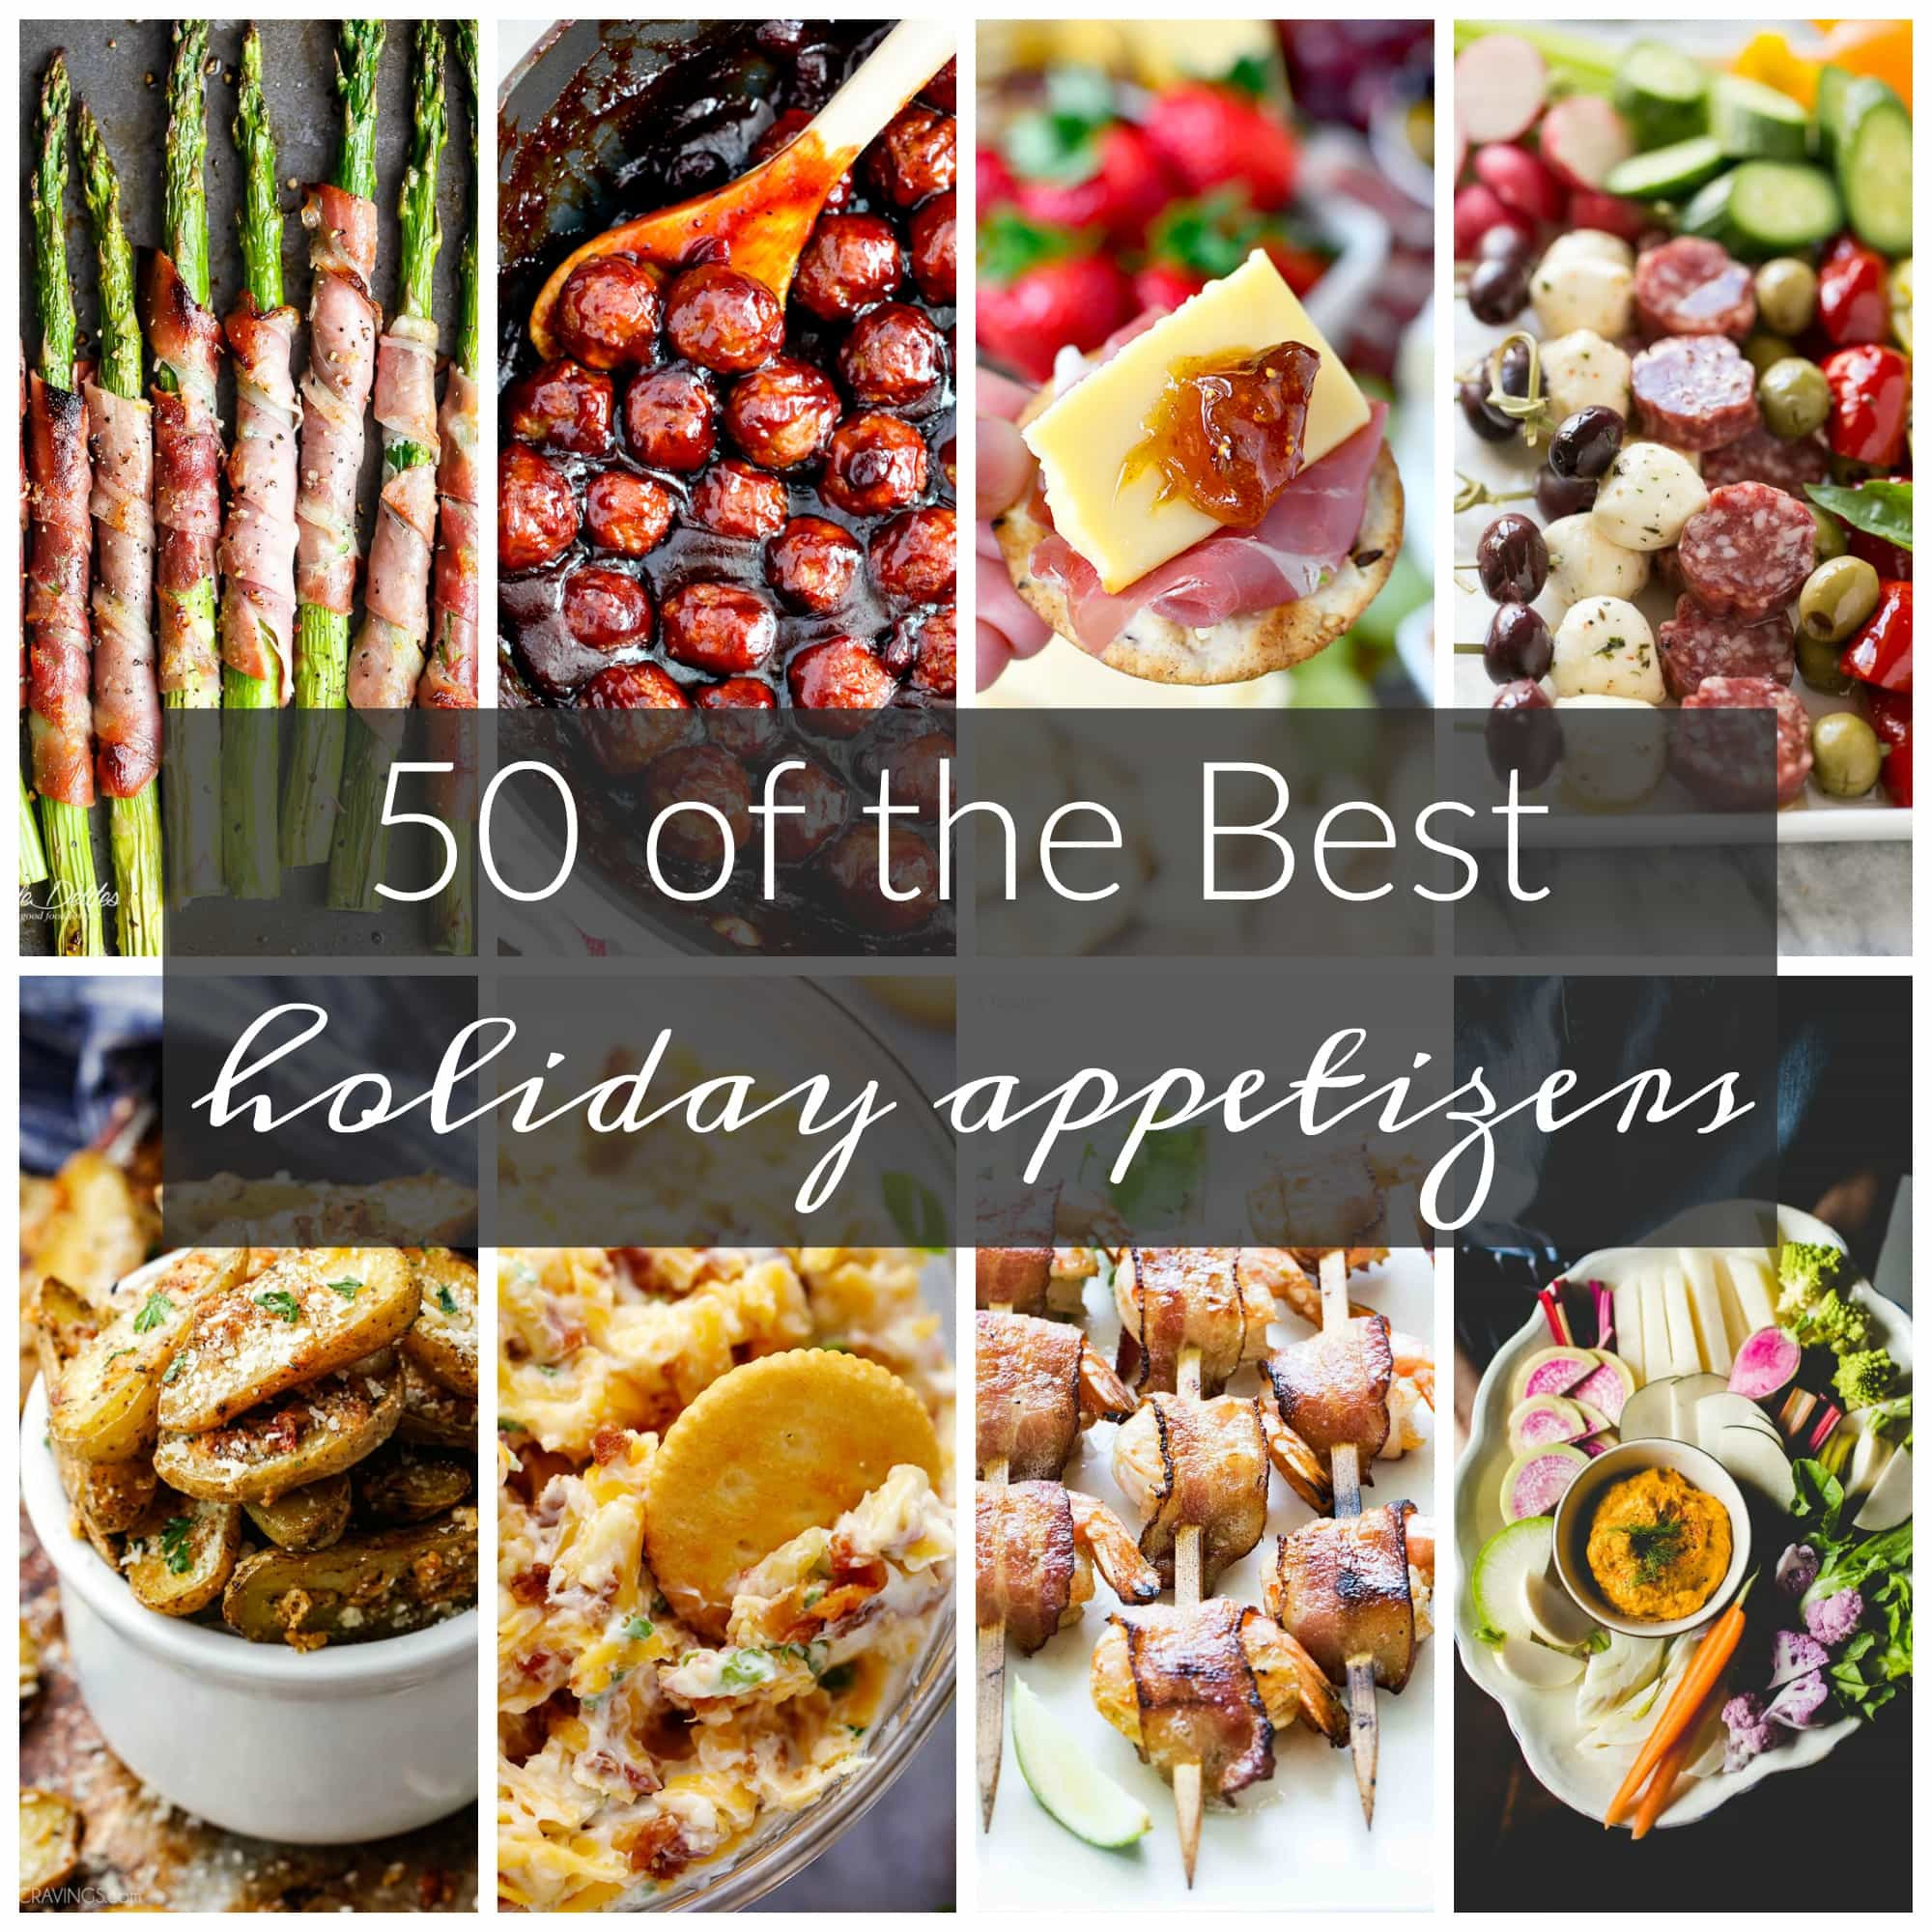 Christmas Appetizers On Pinterest
 50 of the Best Appetizers for the Holidays A Dash of Sanity